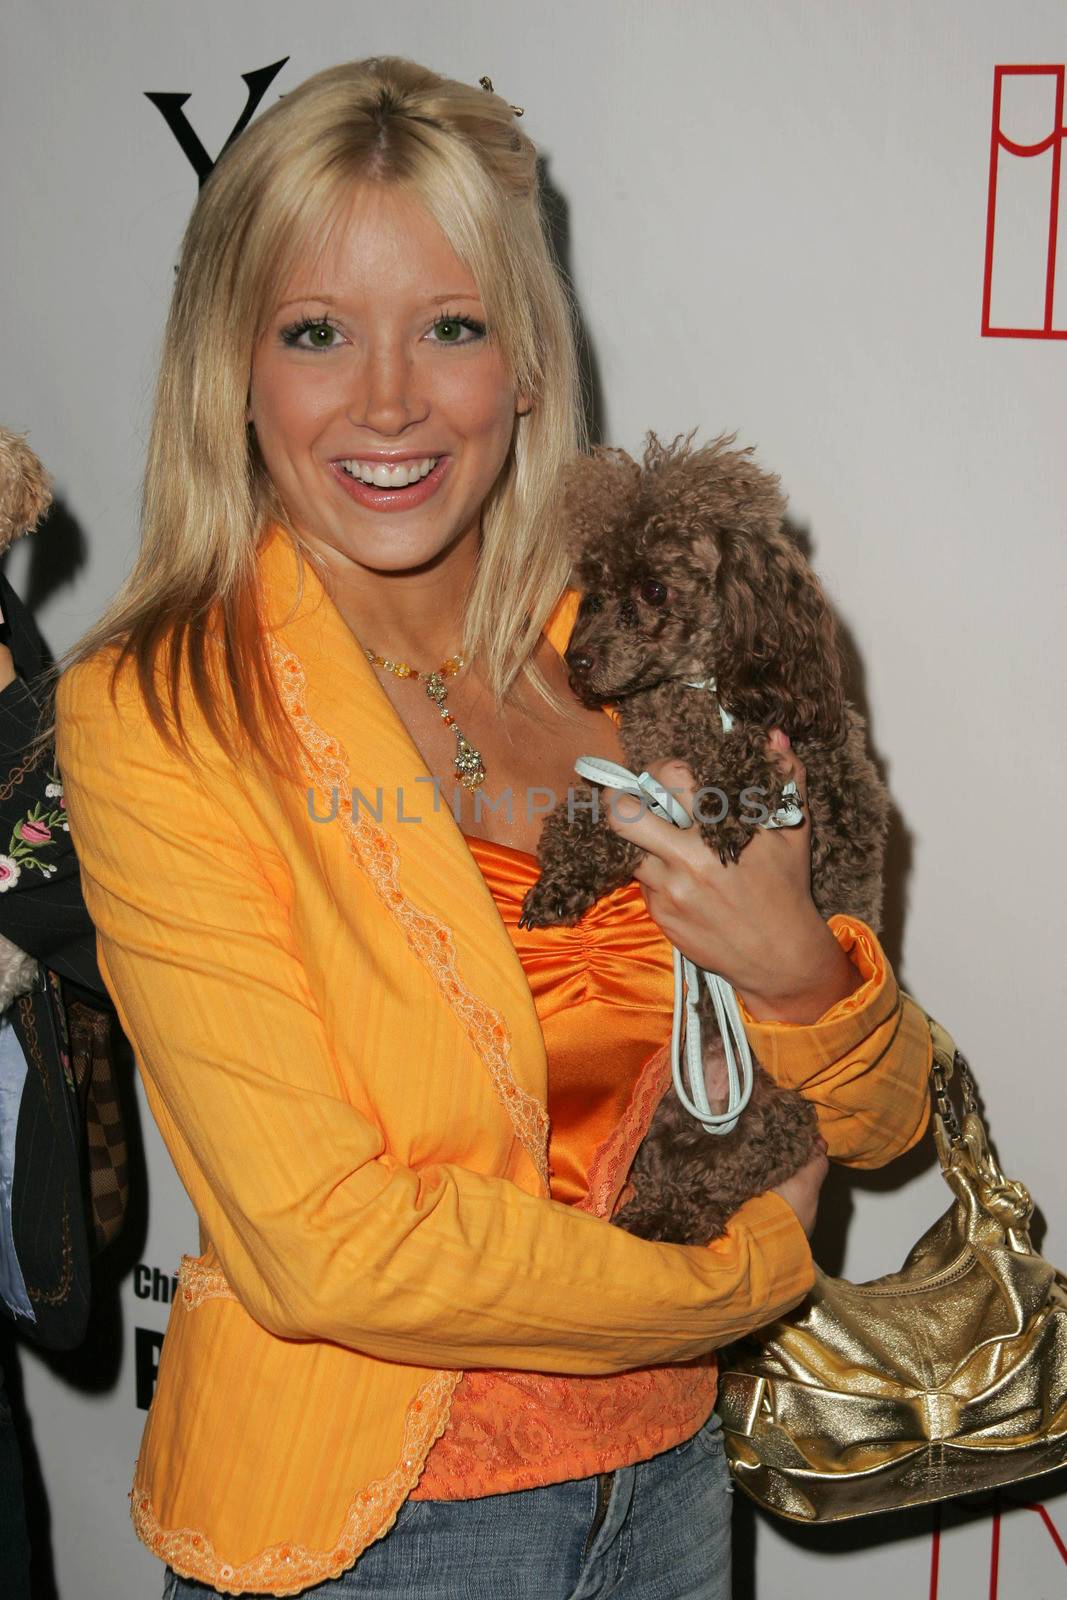 Courtney Peldon at the In Touch Presents Pets And Their Stars Party, Cabana Club, Hollywood, CA 09-21-05